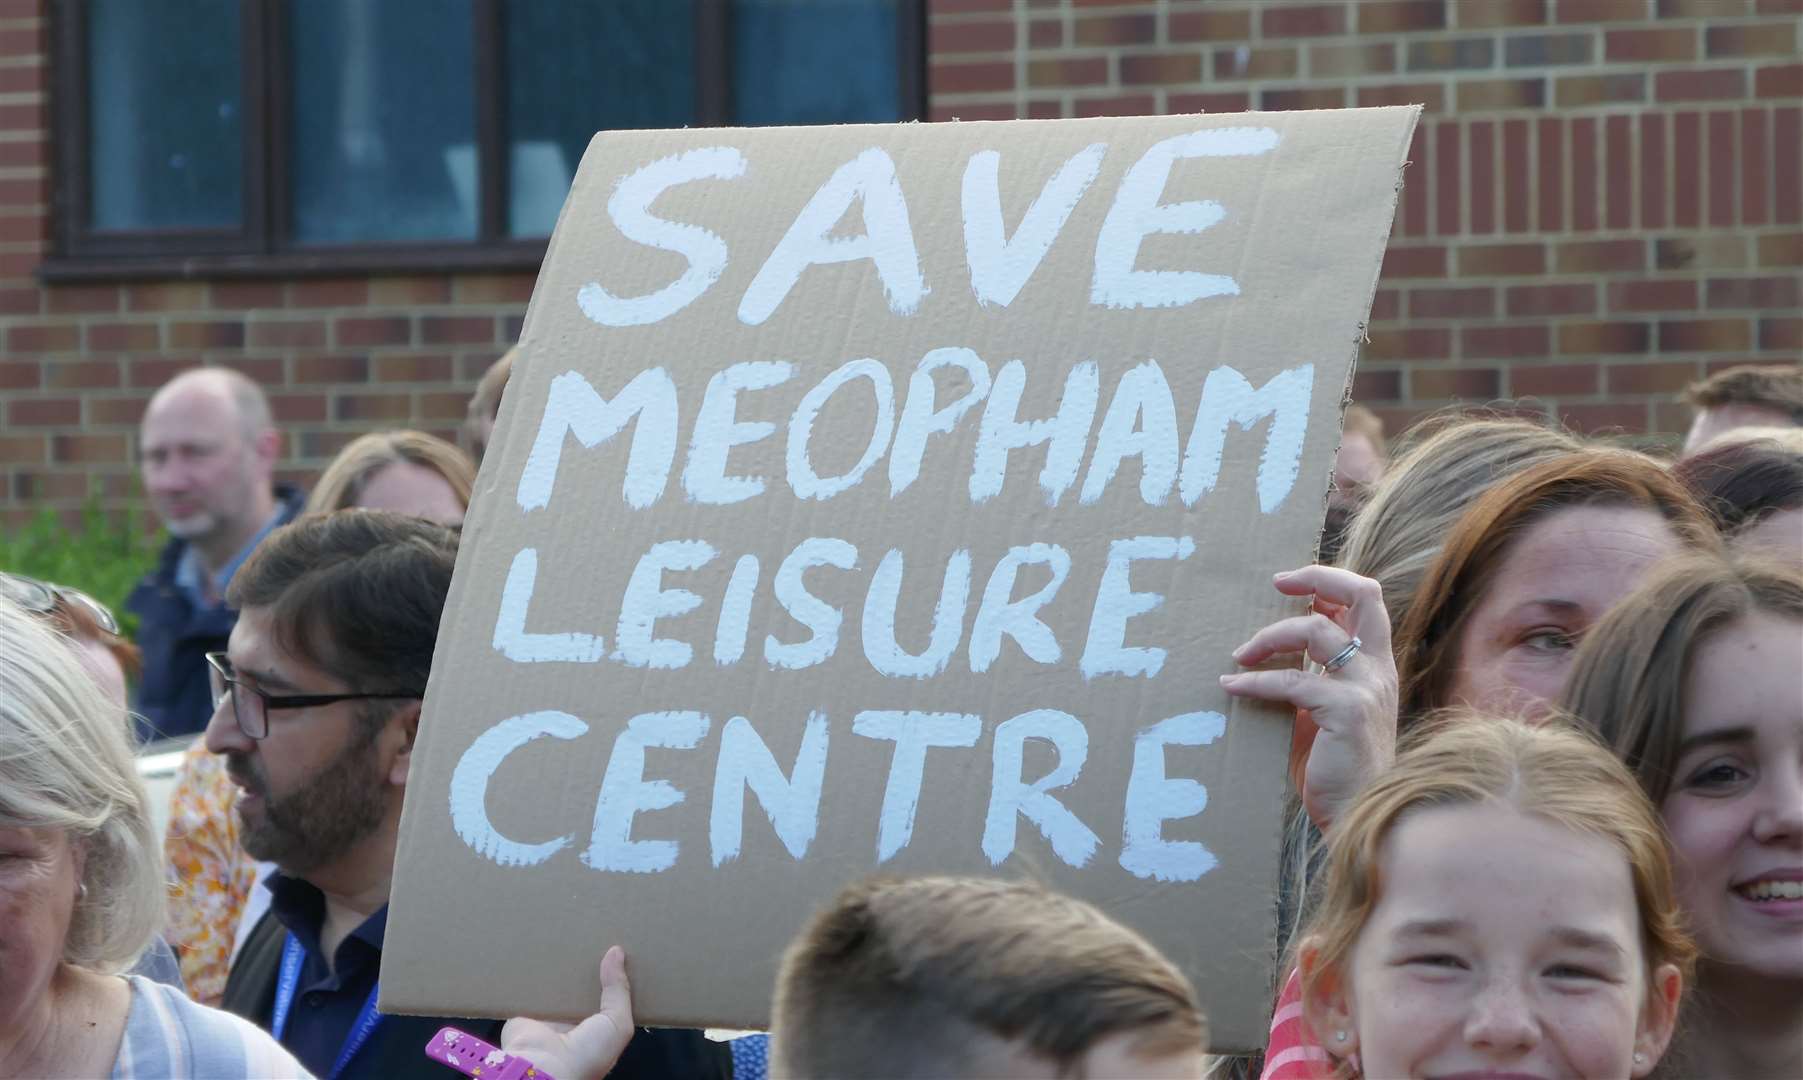 Meopham Leisure Centre could close by the end of the month if an agreement cannot be reached. Photo: Anna Roberts